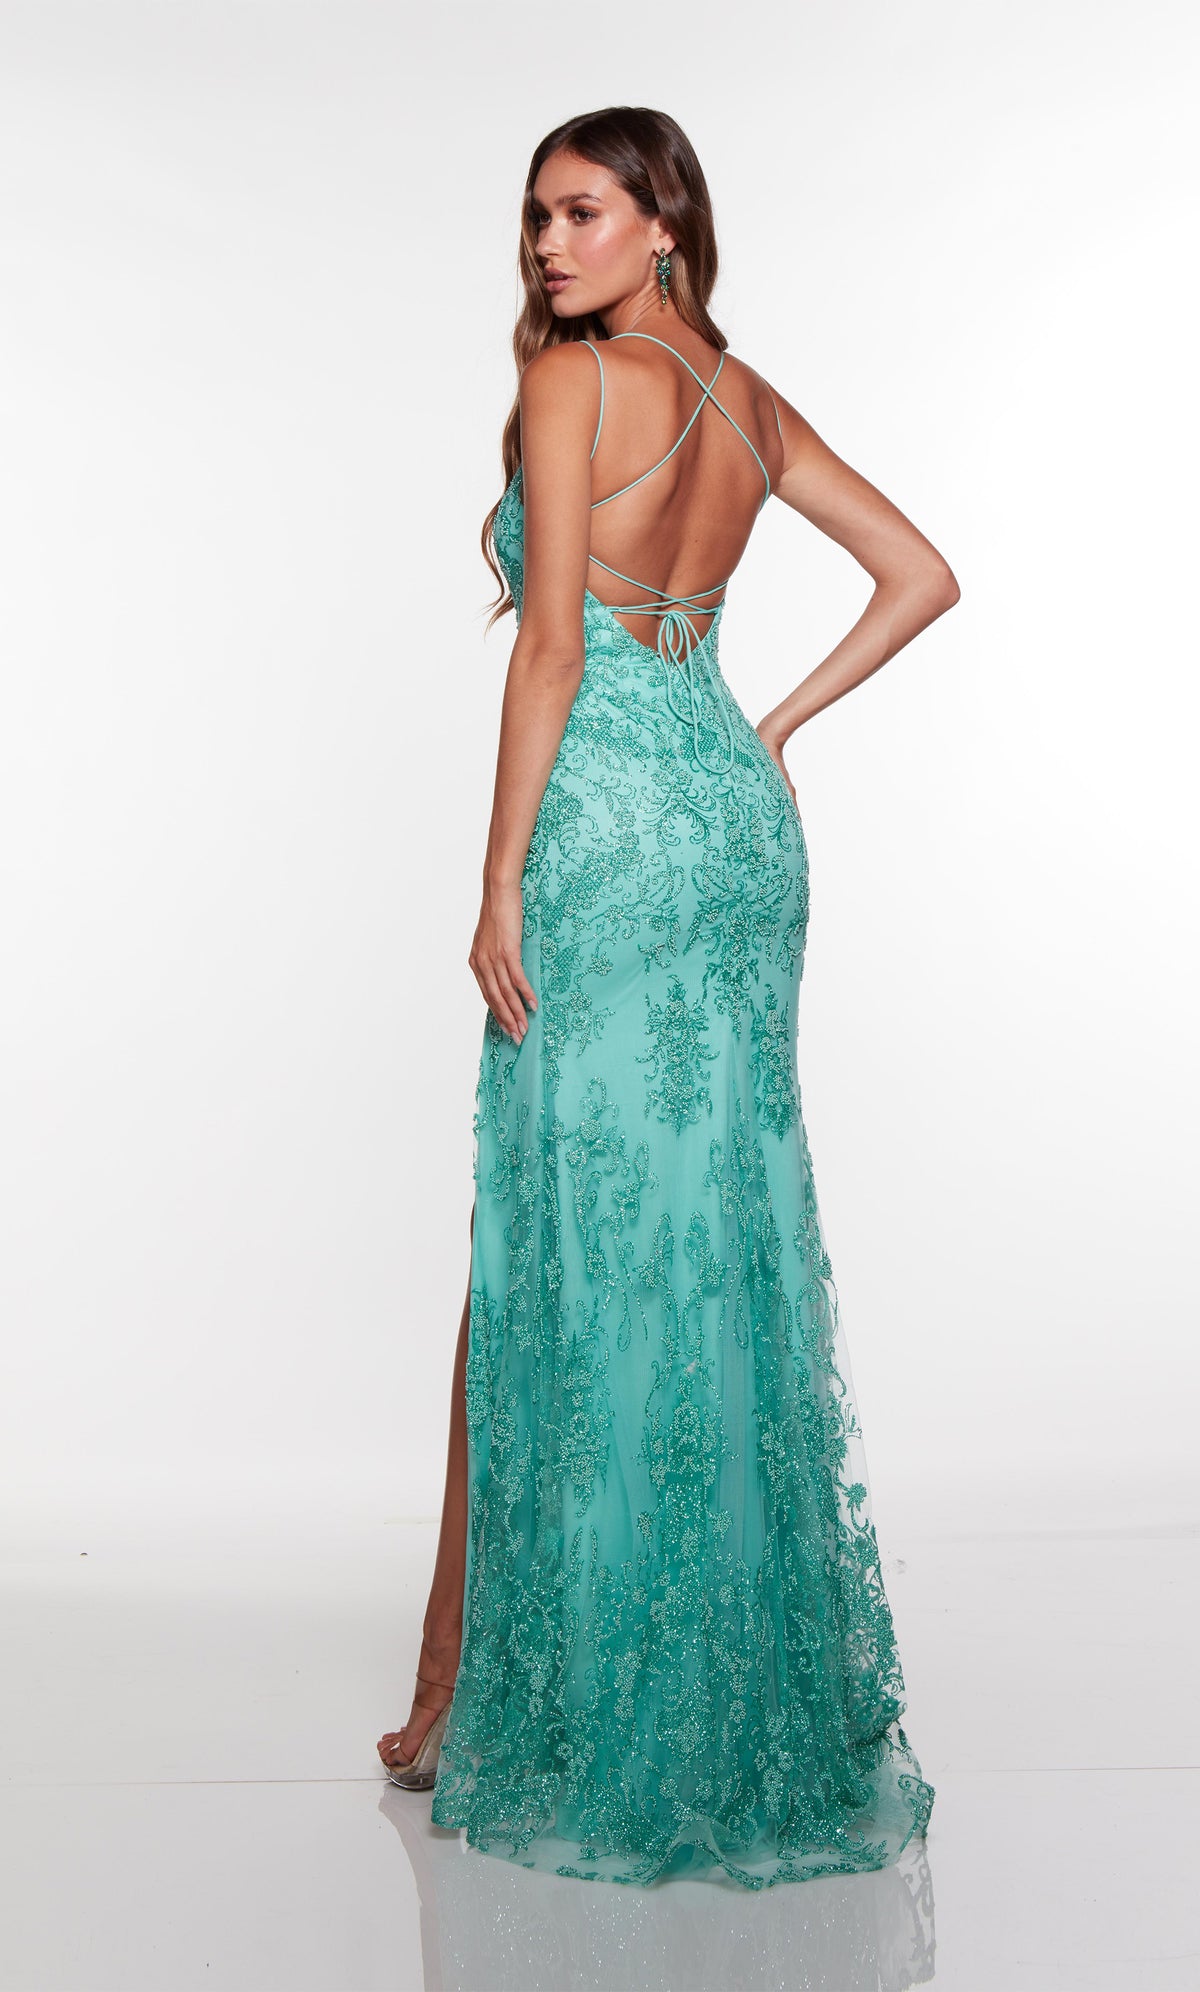 Jade lace prom dress with a strappy open back and train.